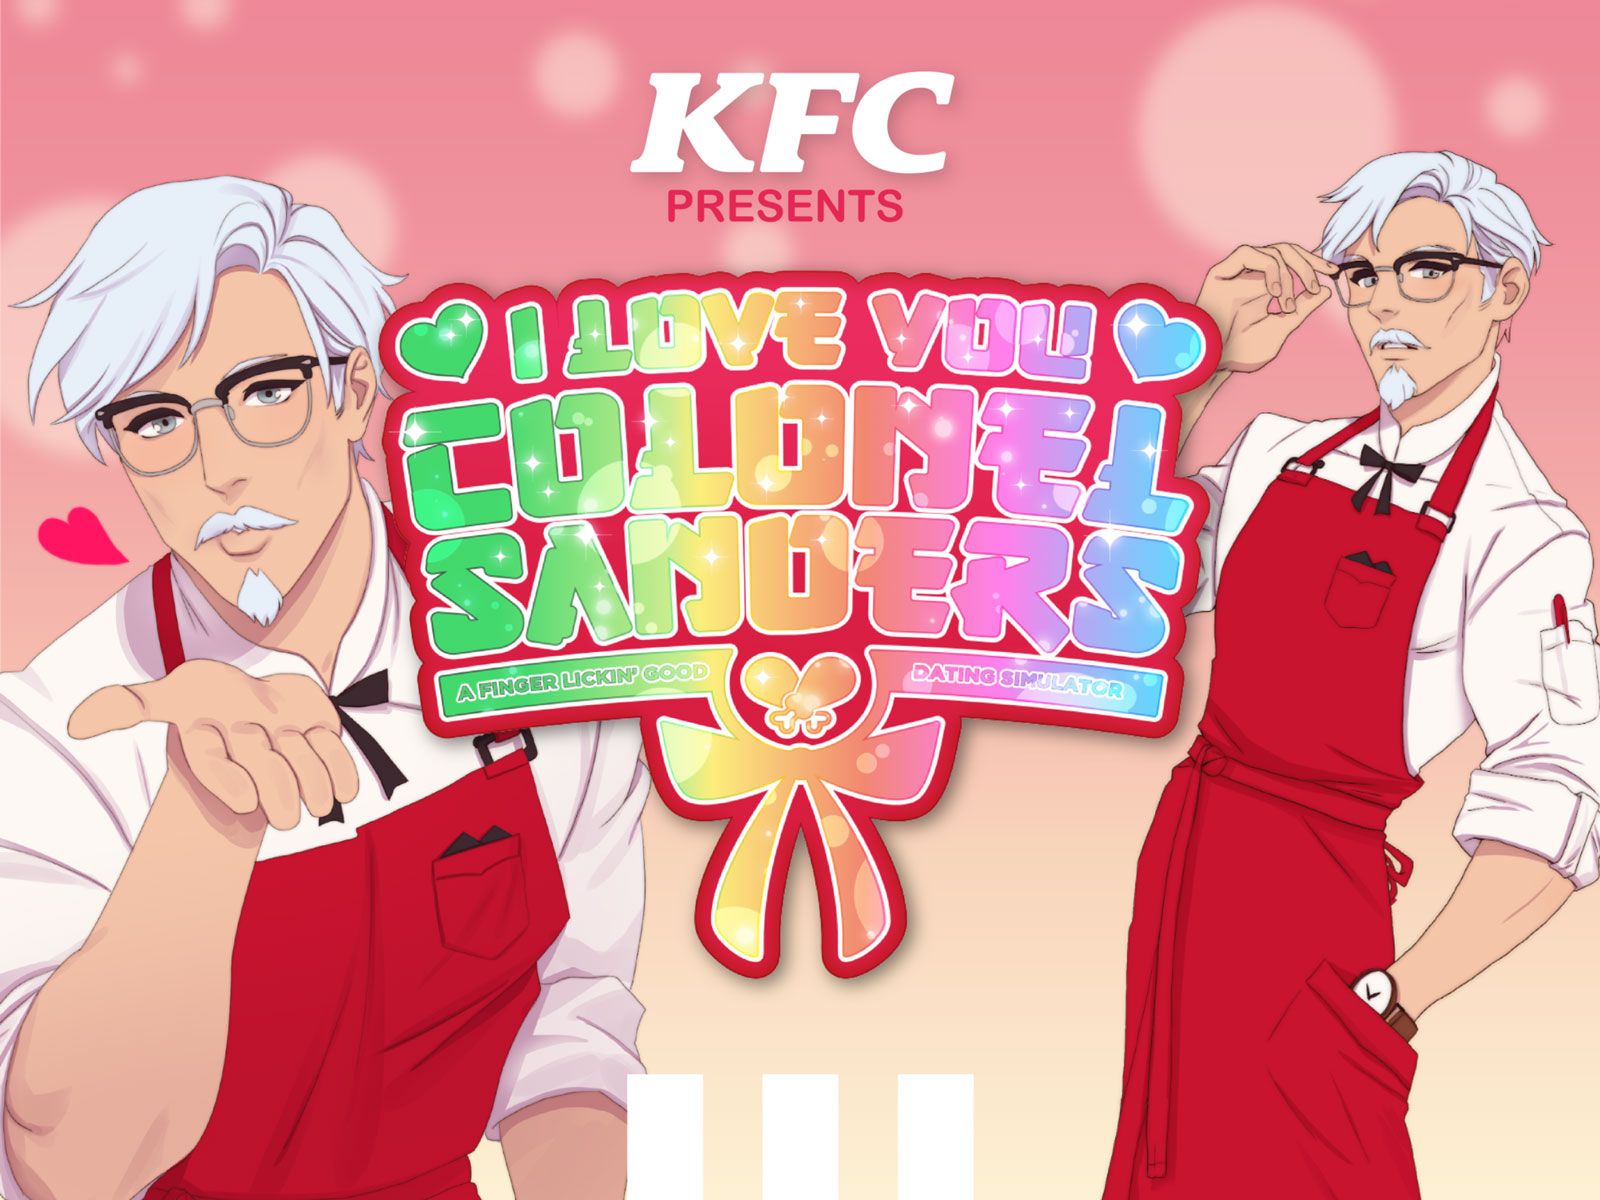 KFC's New Video Game Lets You Date Colonel Sanders. Food & Wine